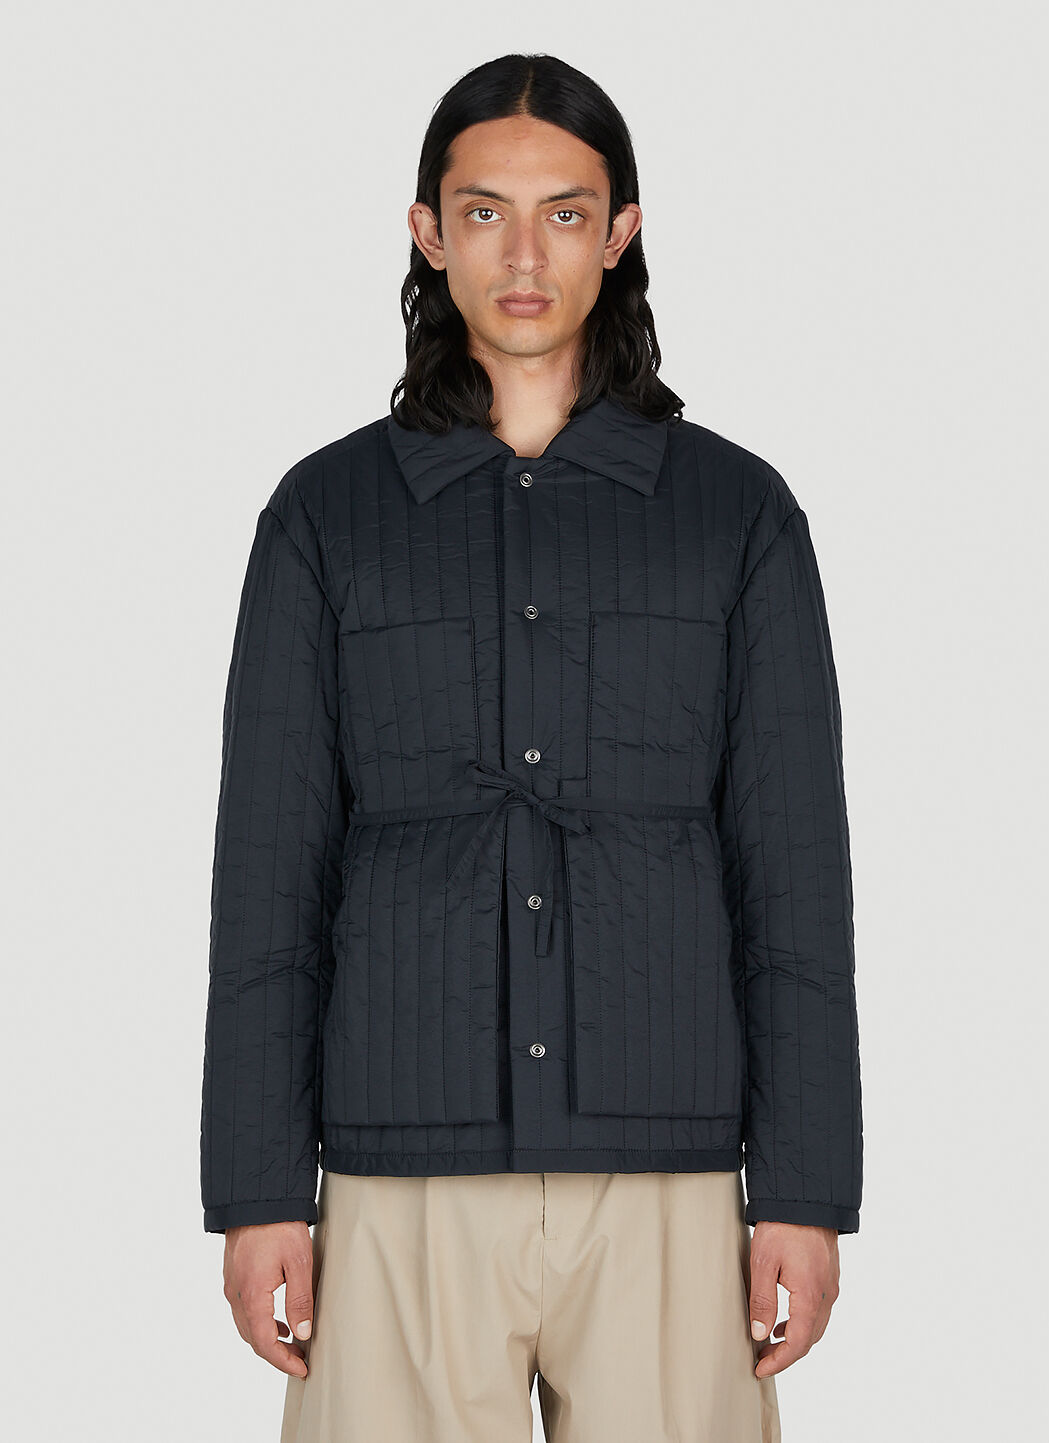 Craig Green Unisex Quilted Worker Jacket in Black | LN-CC®